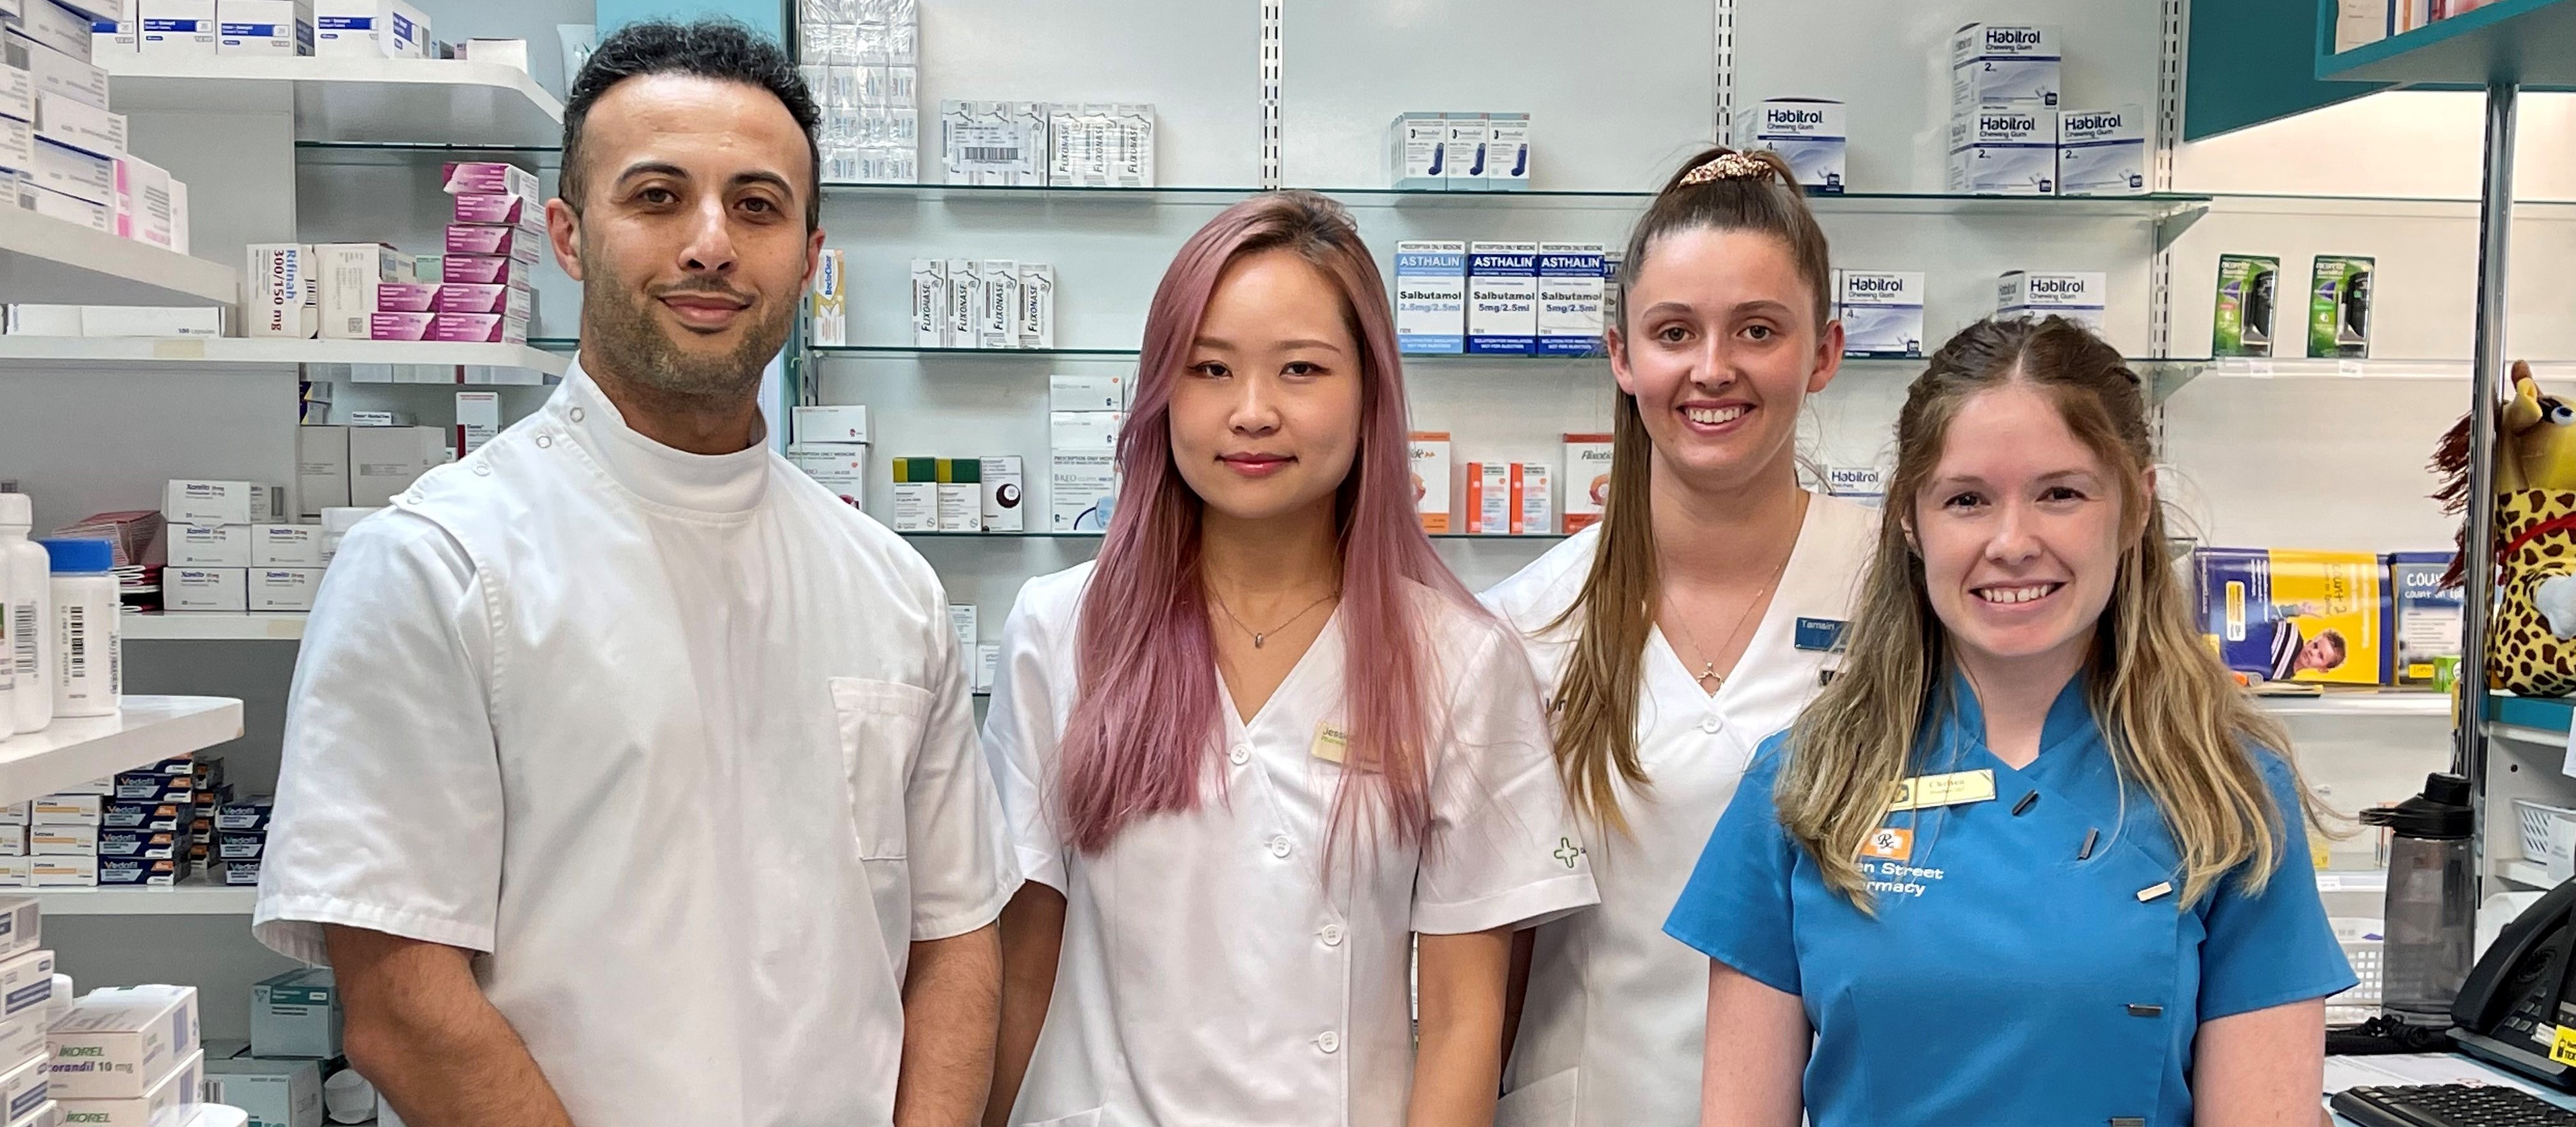 Unichem Coromandel Pharmacy team: owner Anas Wadood, pharmacist Jessica Guo, technician Tamsin Armstrong and pharmacist Chelsea Todd 